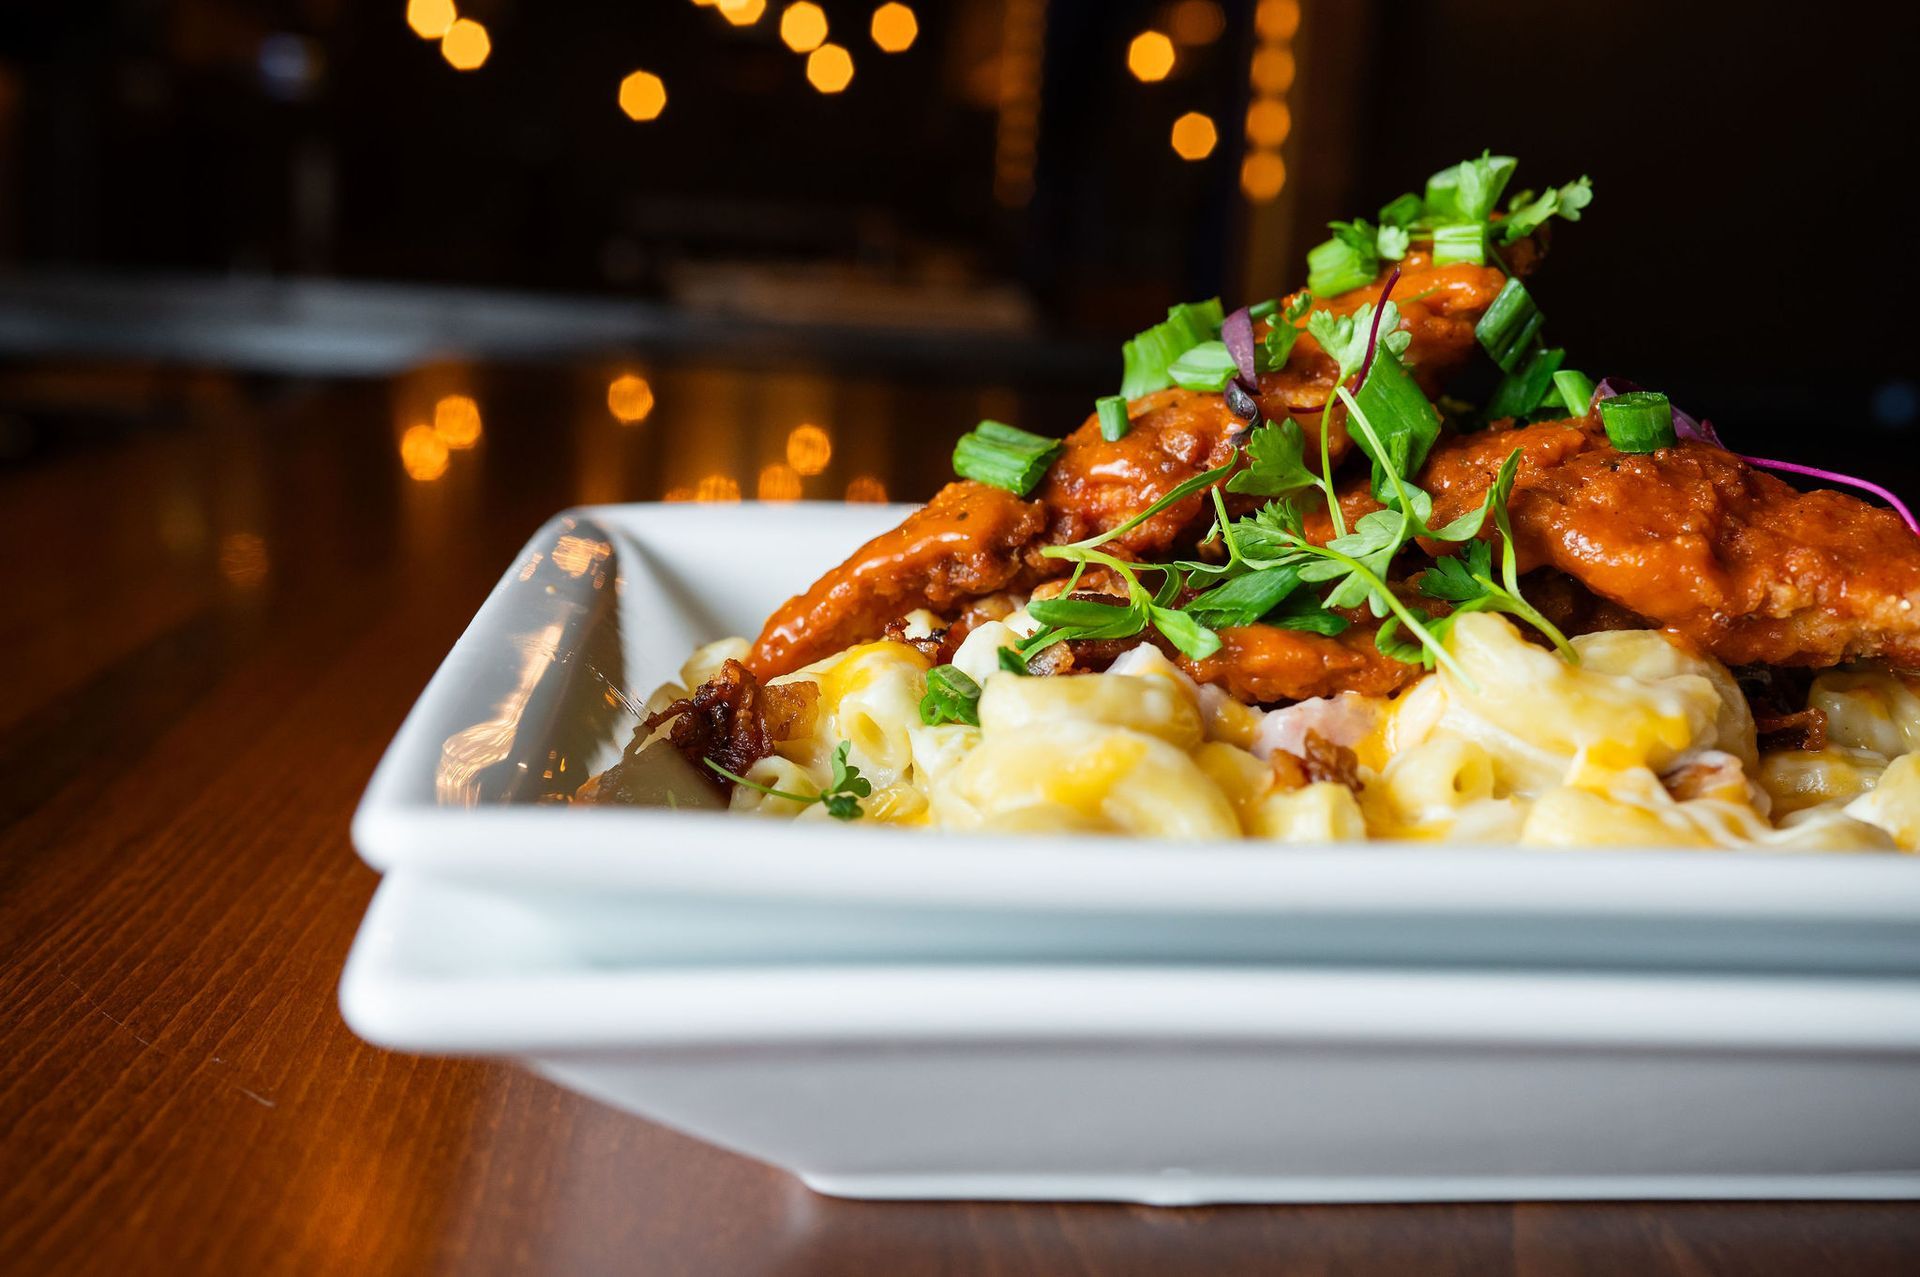 Dine on Delicious Mac & Cheese at The Penguin Piano Bar & Restaurant in Columbia, MO